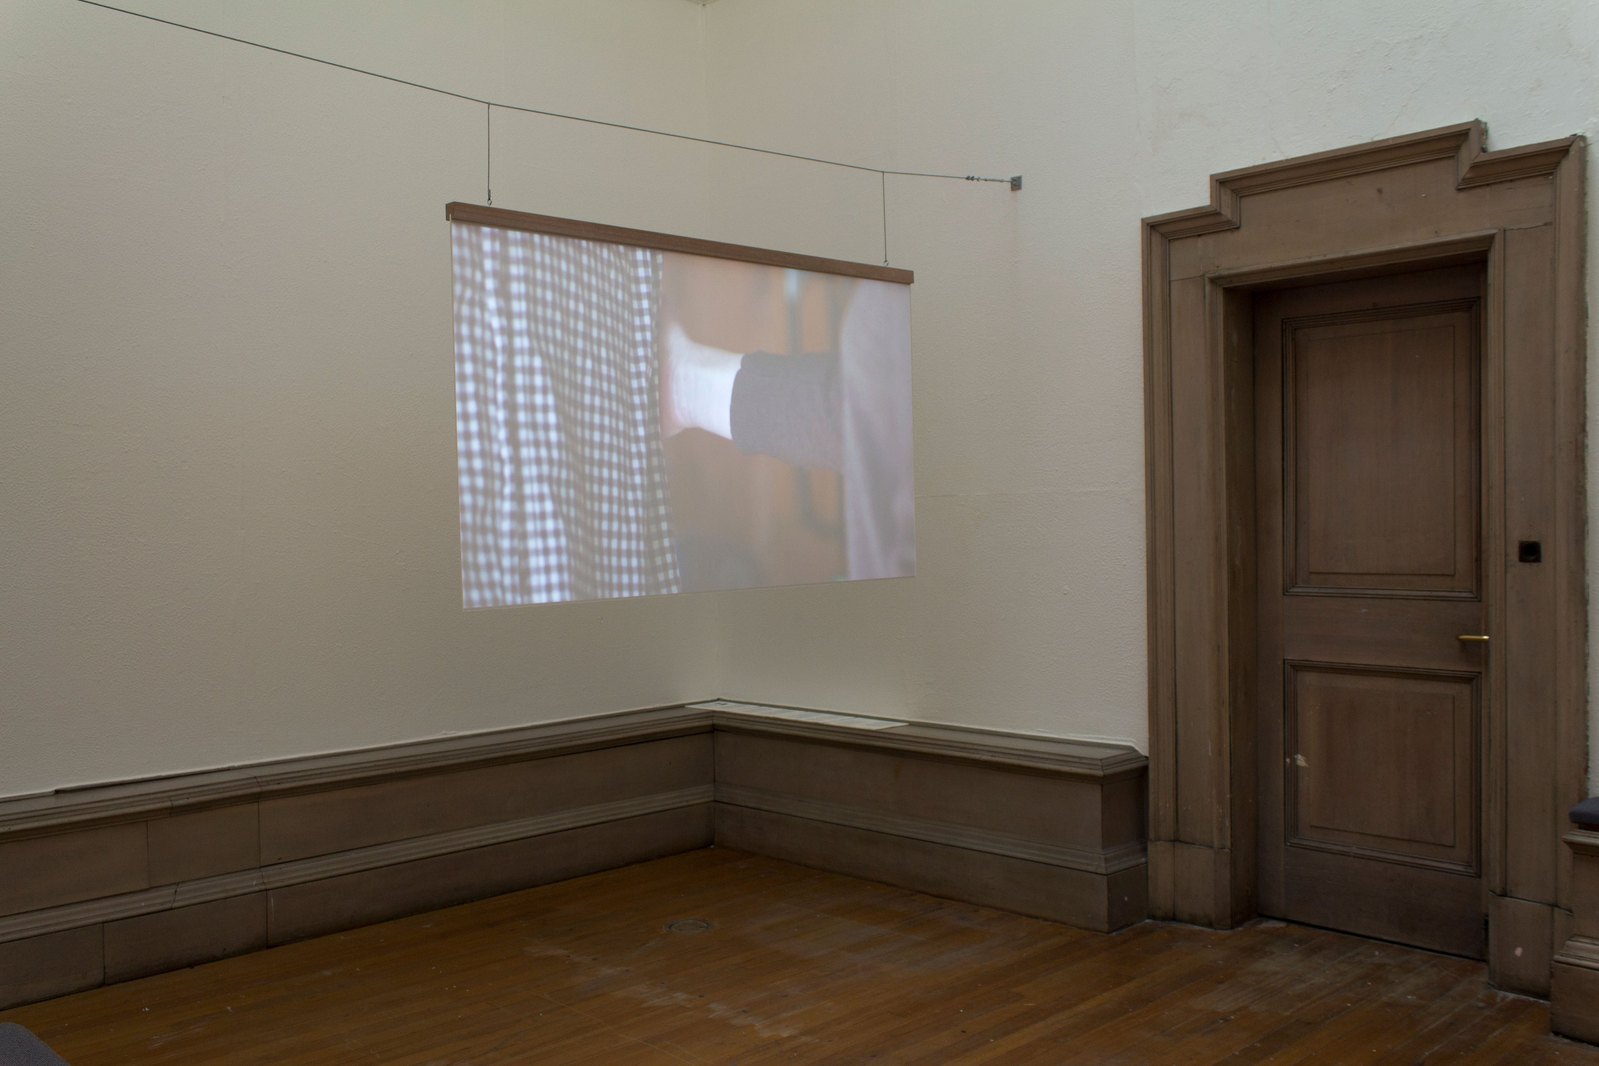 A hanging projection screen inside a beige room with a door to the right In the projection someones arm is reaching to the touch another persons arm who is wearing a checkered shirt